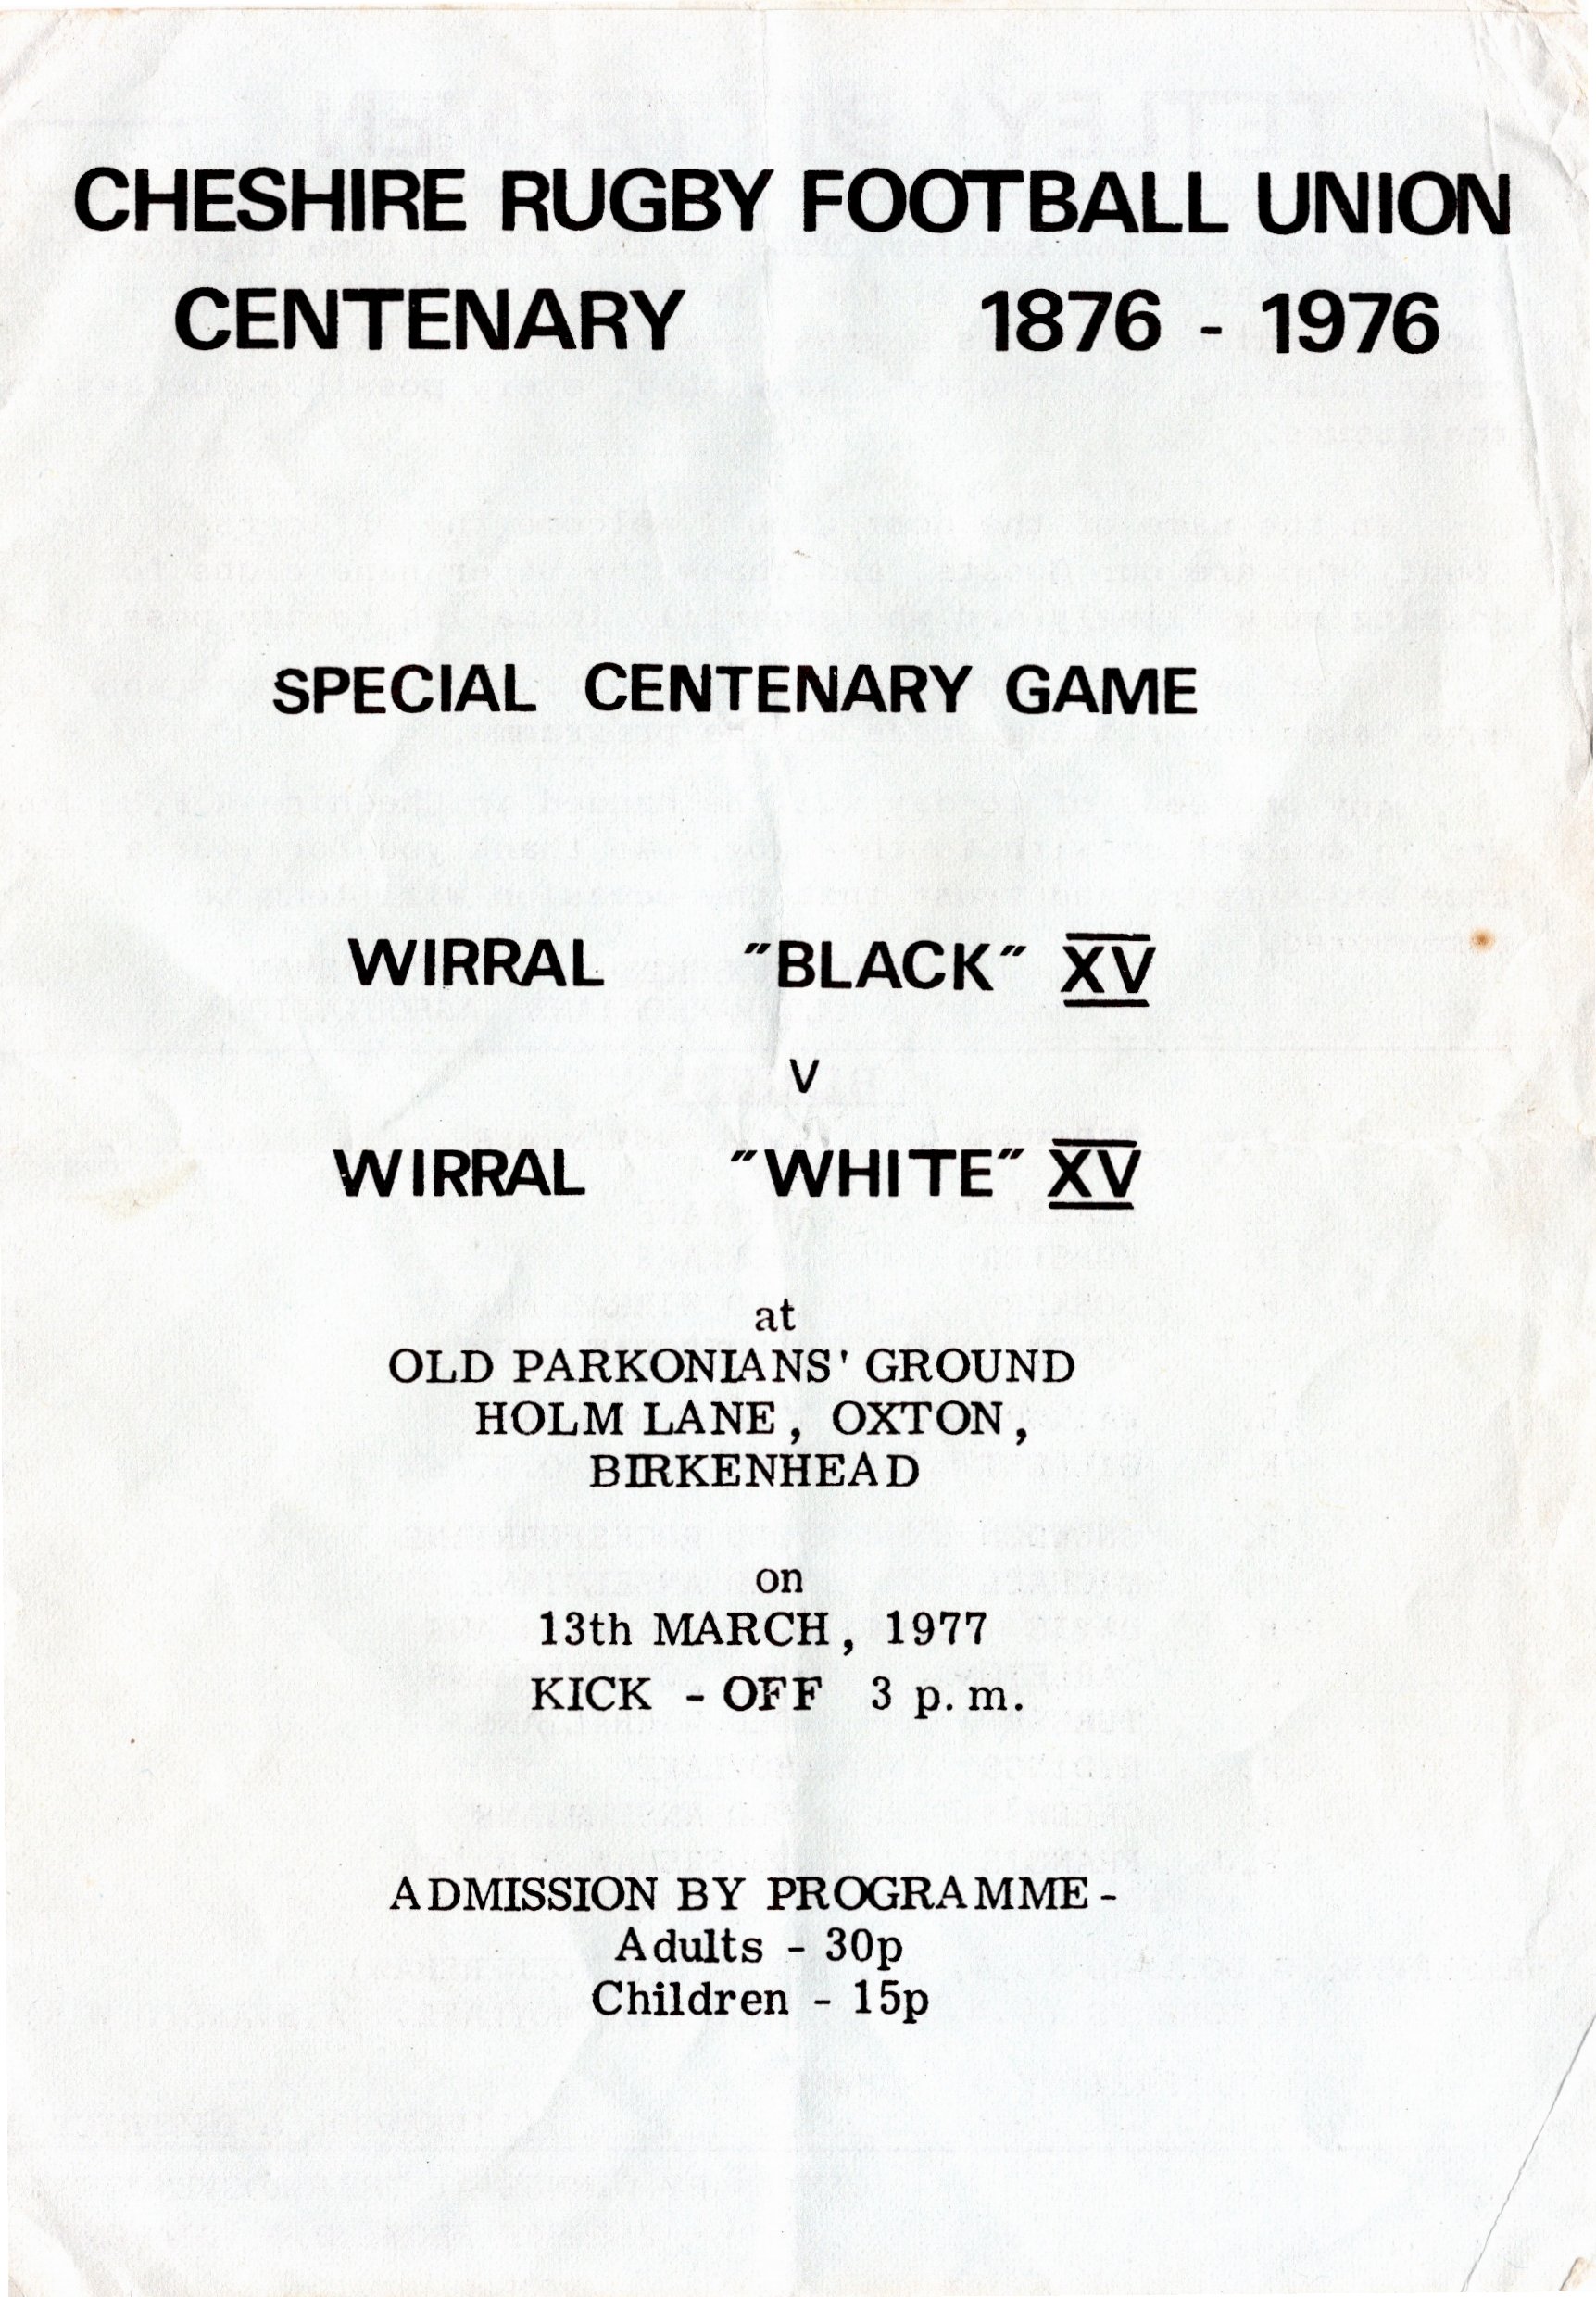 Old Instonians RUFC, 1977 Cheshire RFU Special Centenary Match